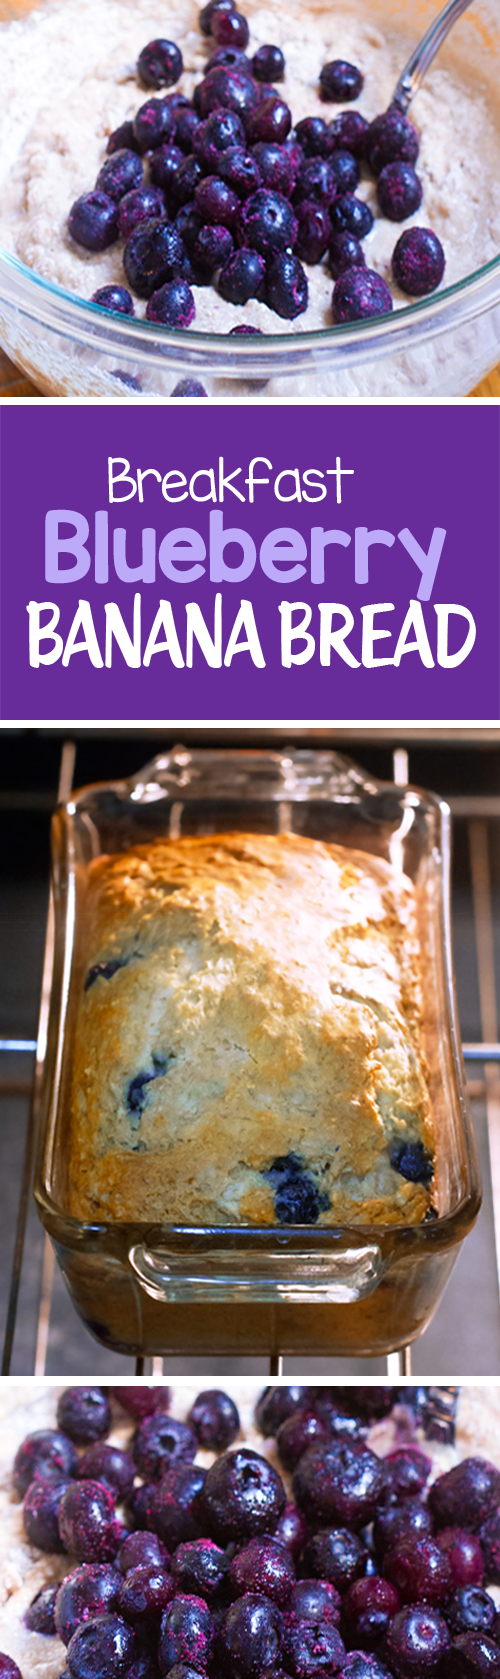 Blueberry Banana Bread, with NO oil, and no refined sugar, great for breakfast